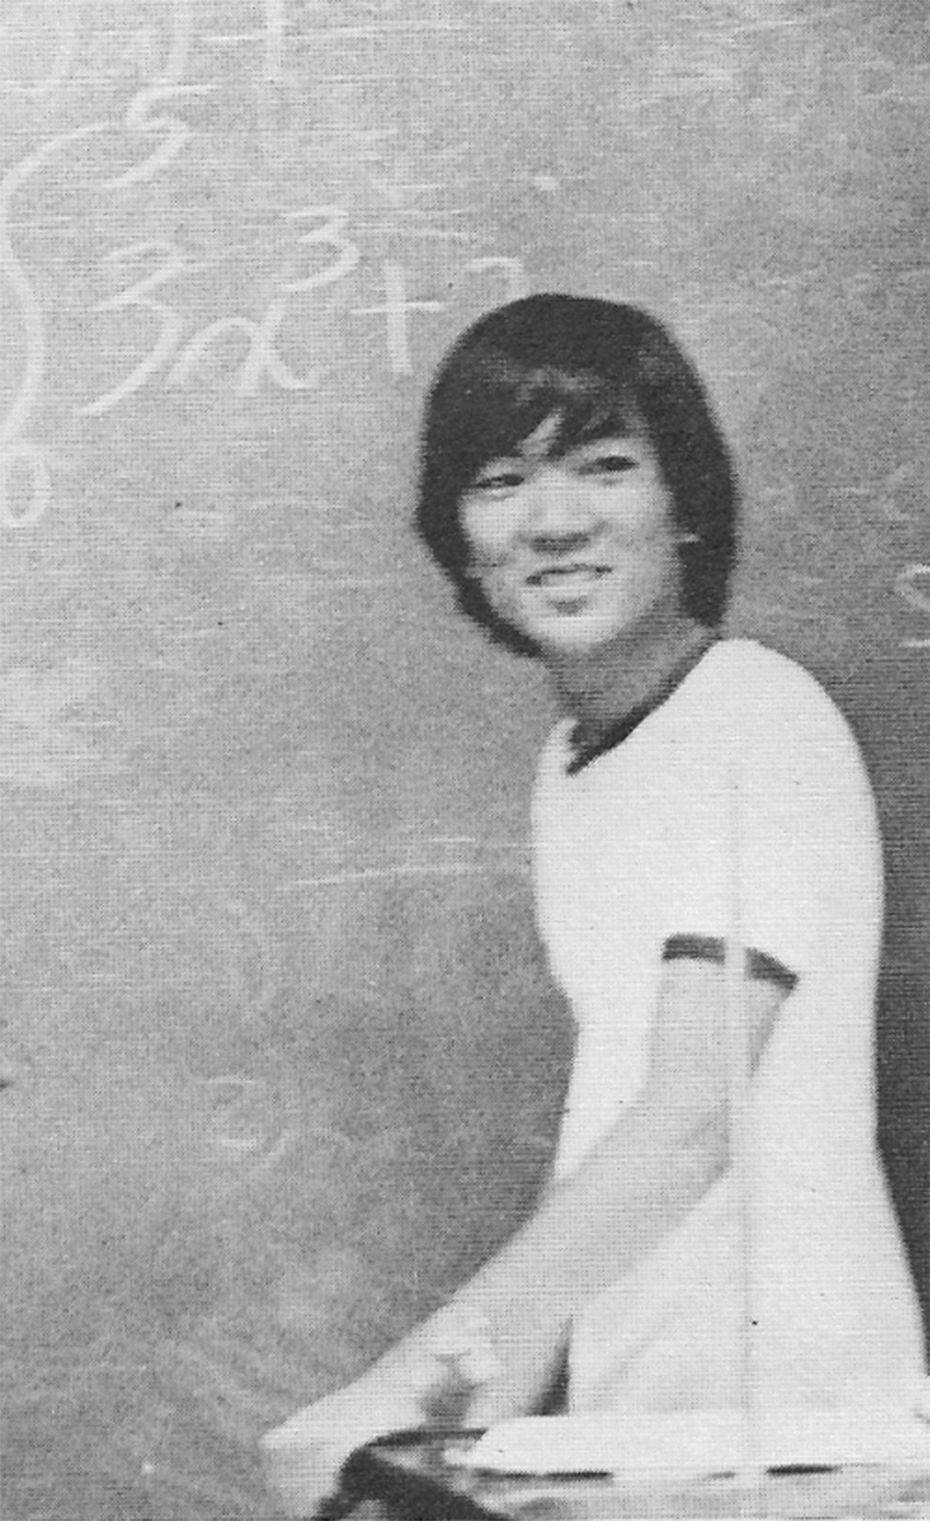 Philip Huang, then a high school senior, was photographed for the 1978 Lake Highlands High...